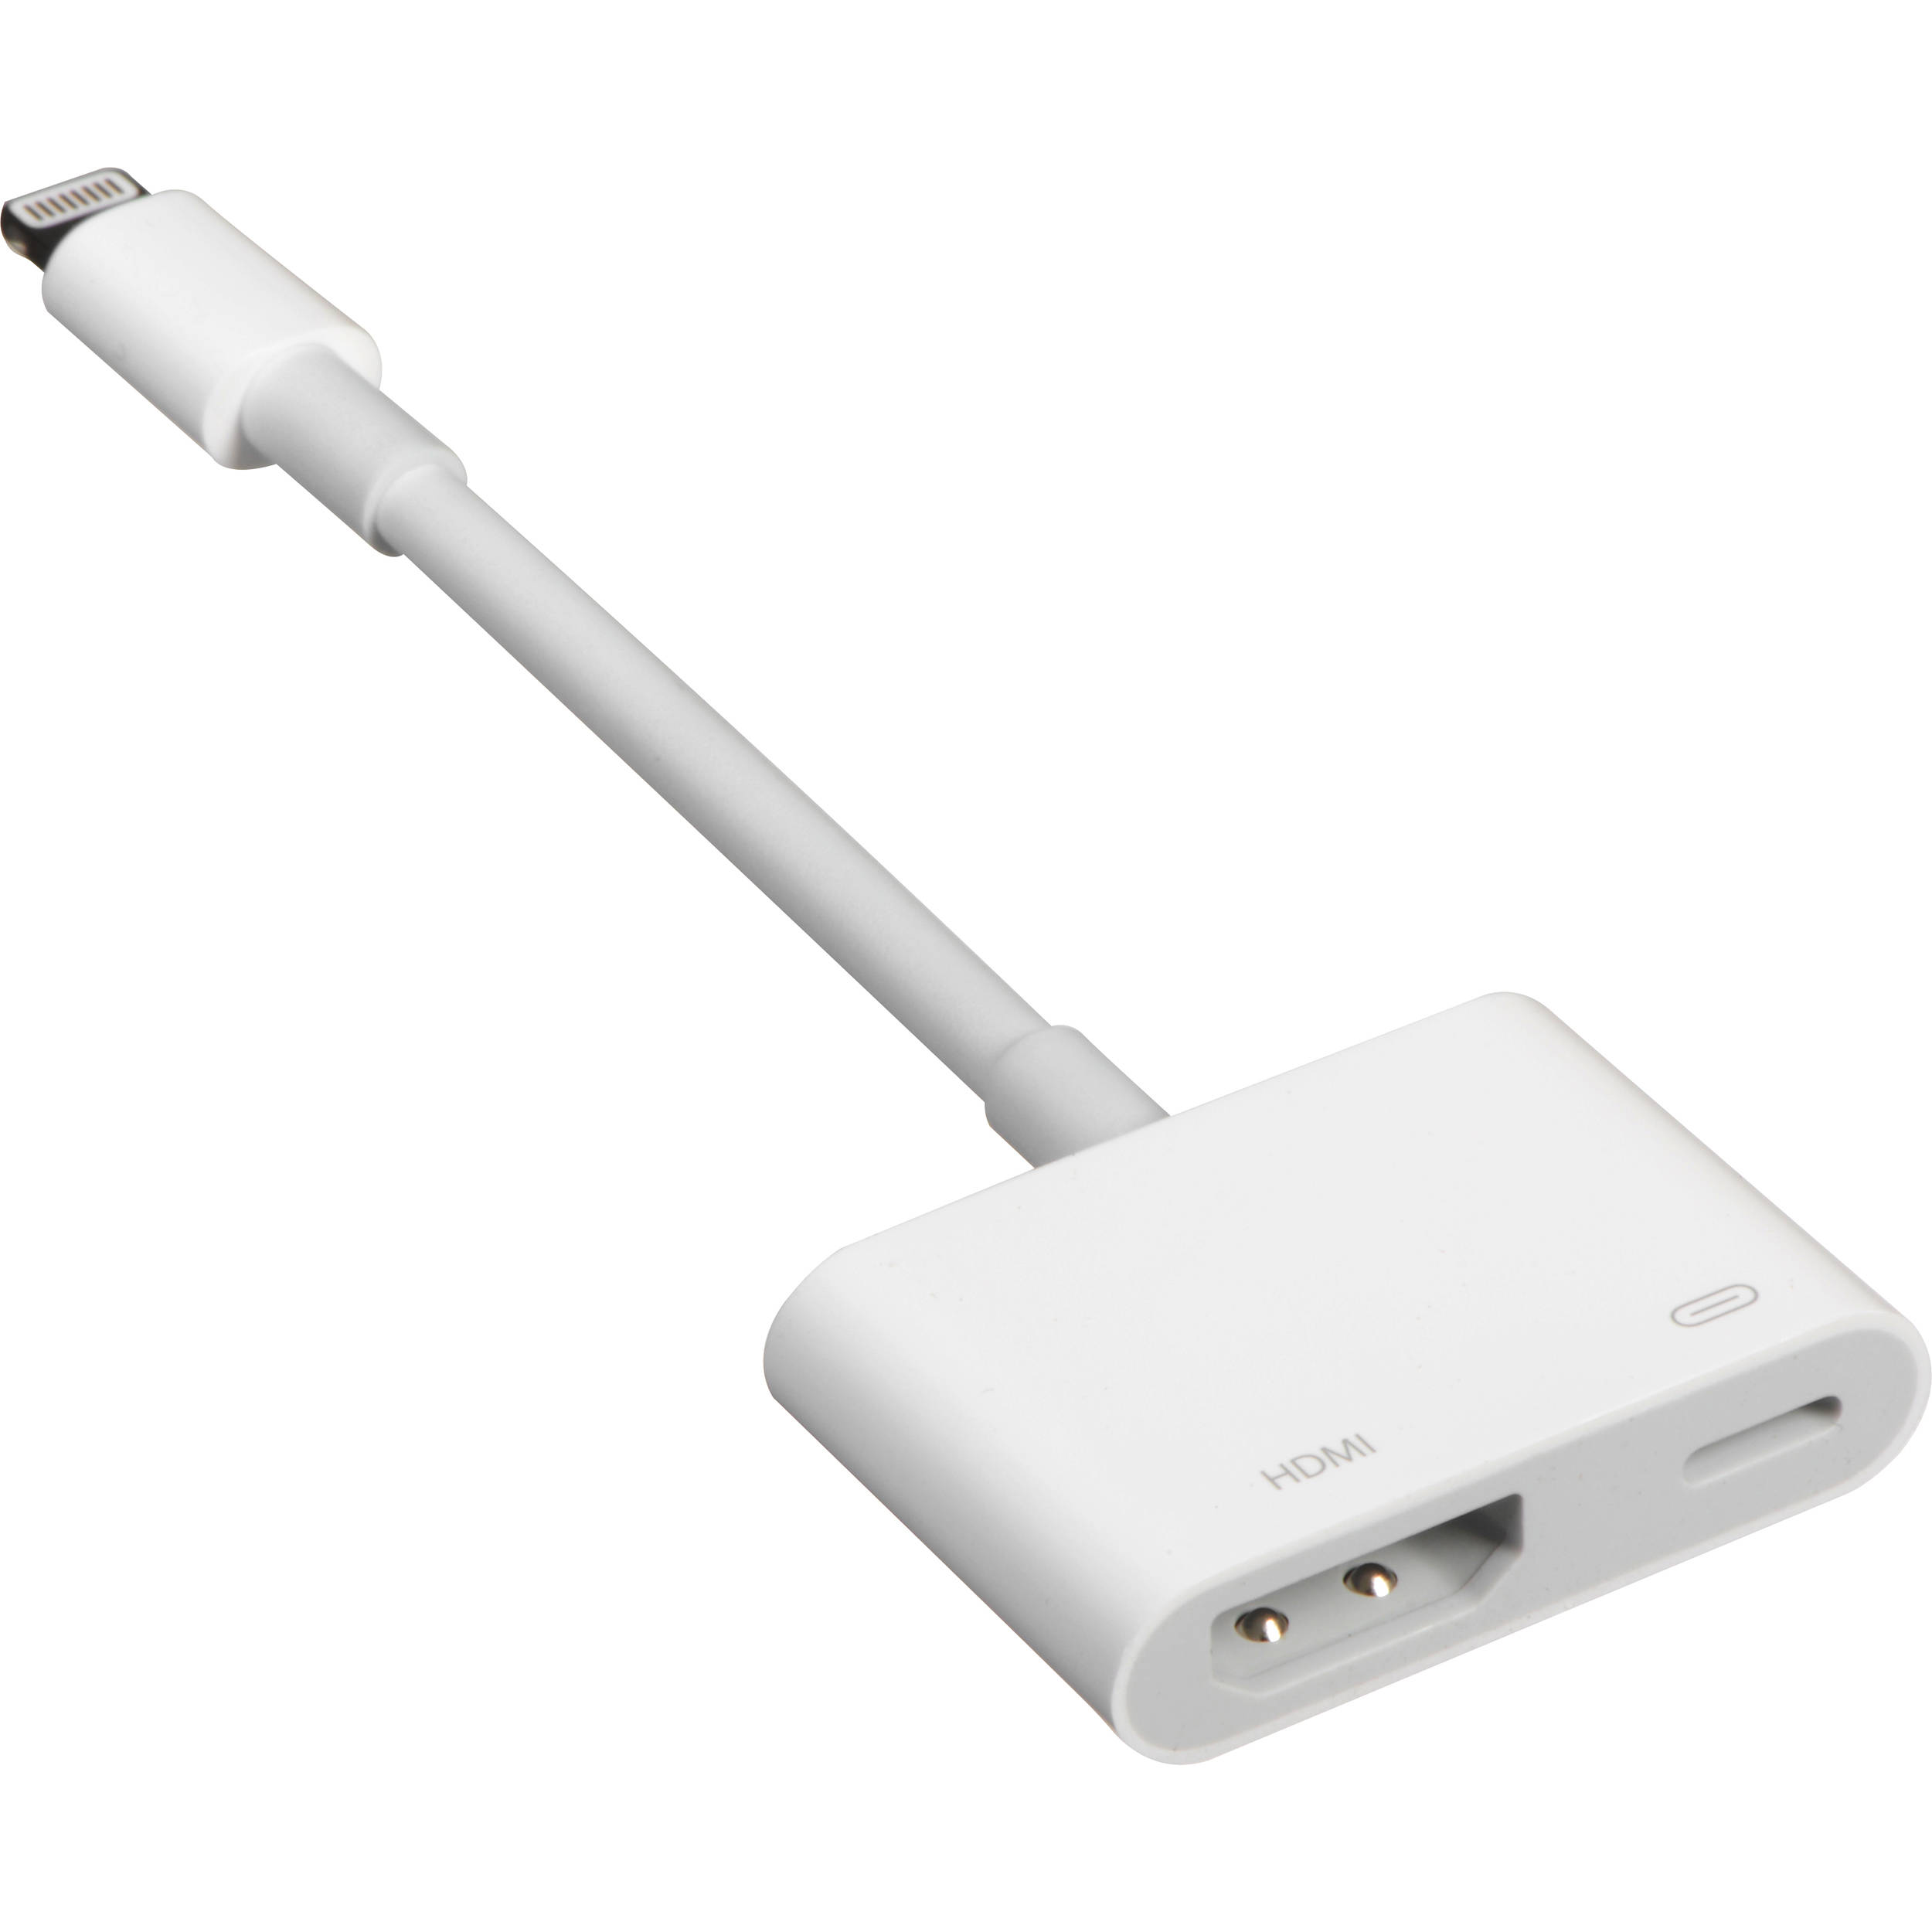 Hdmi Adapter For Mac